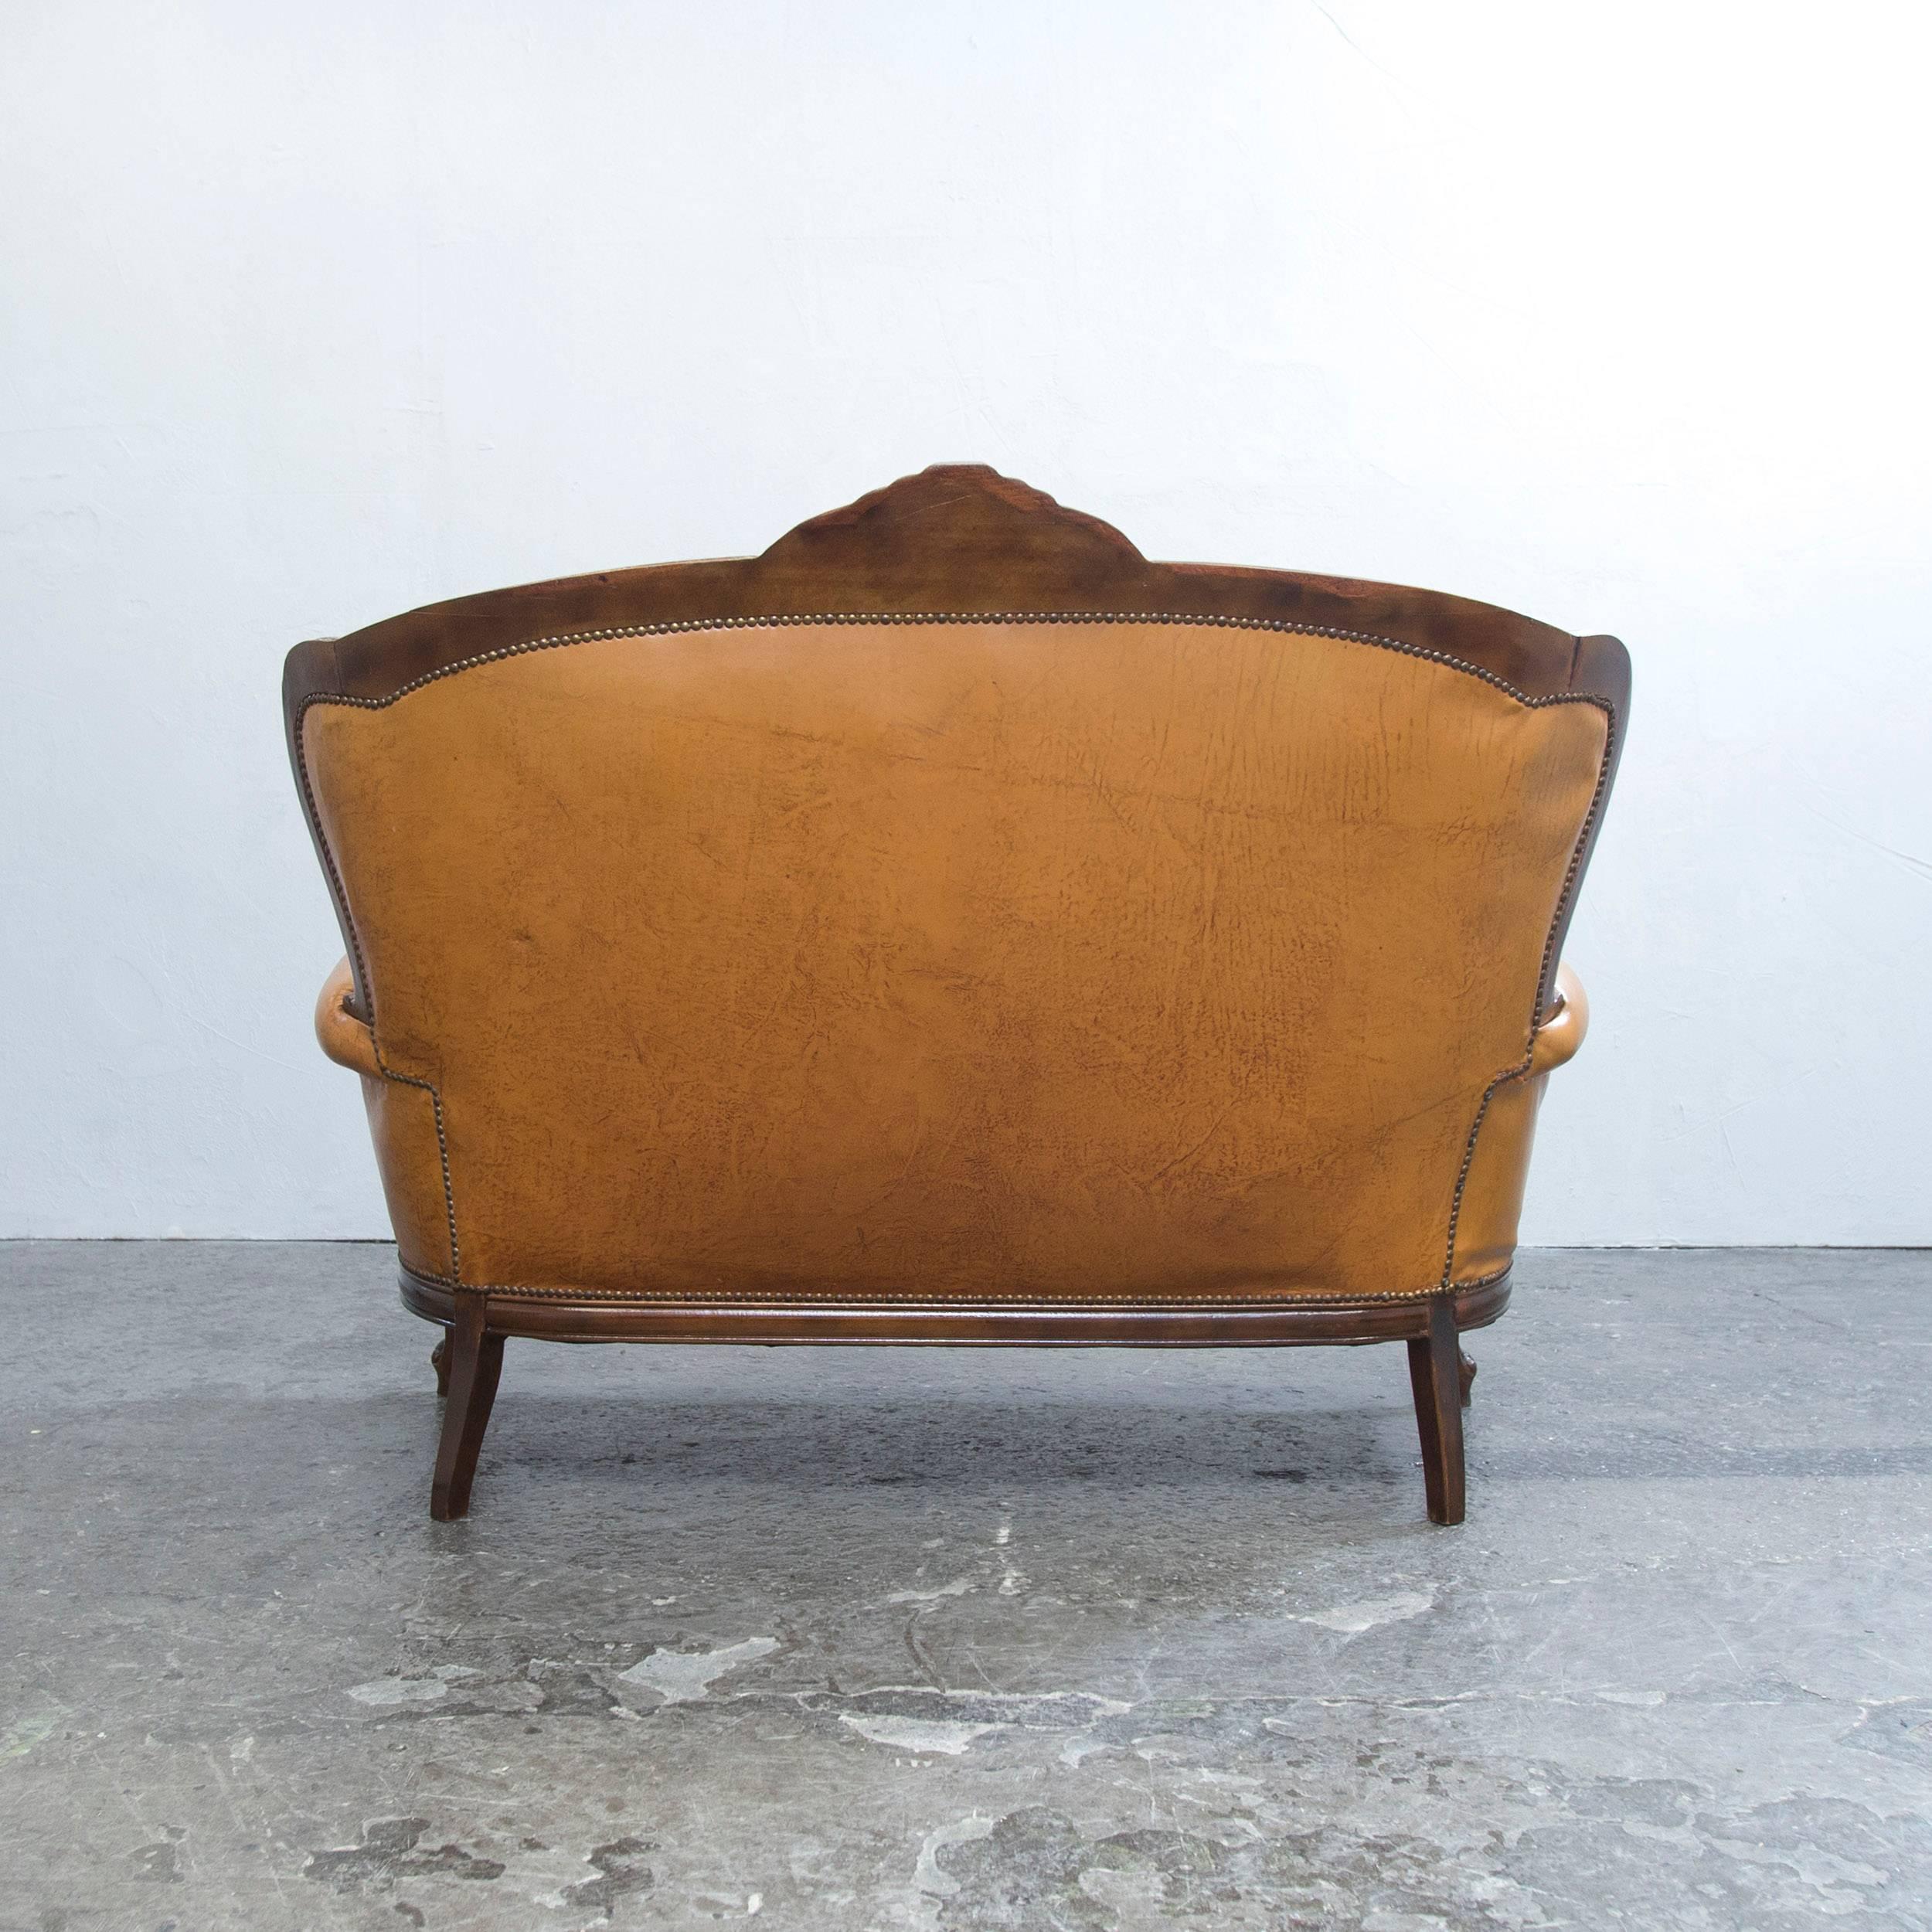 Chesterfield Sofa in Brown Leather Cognac Two-Seat Sofa in Retro, Vintage Style 2